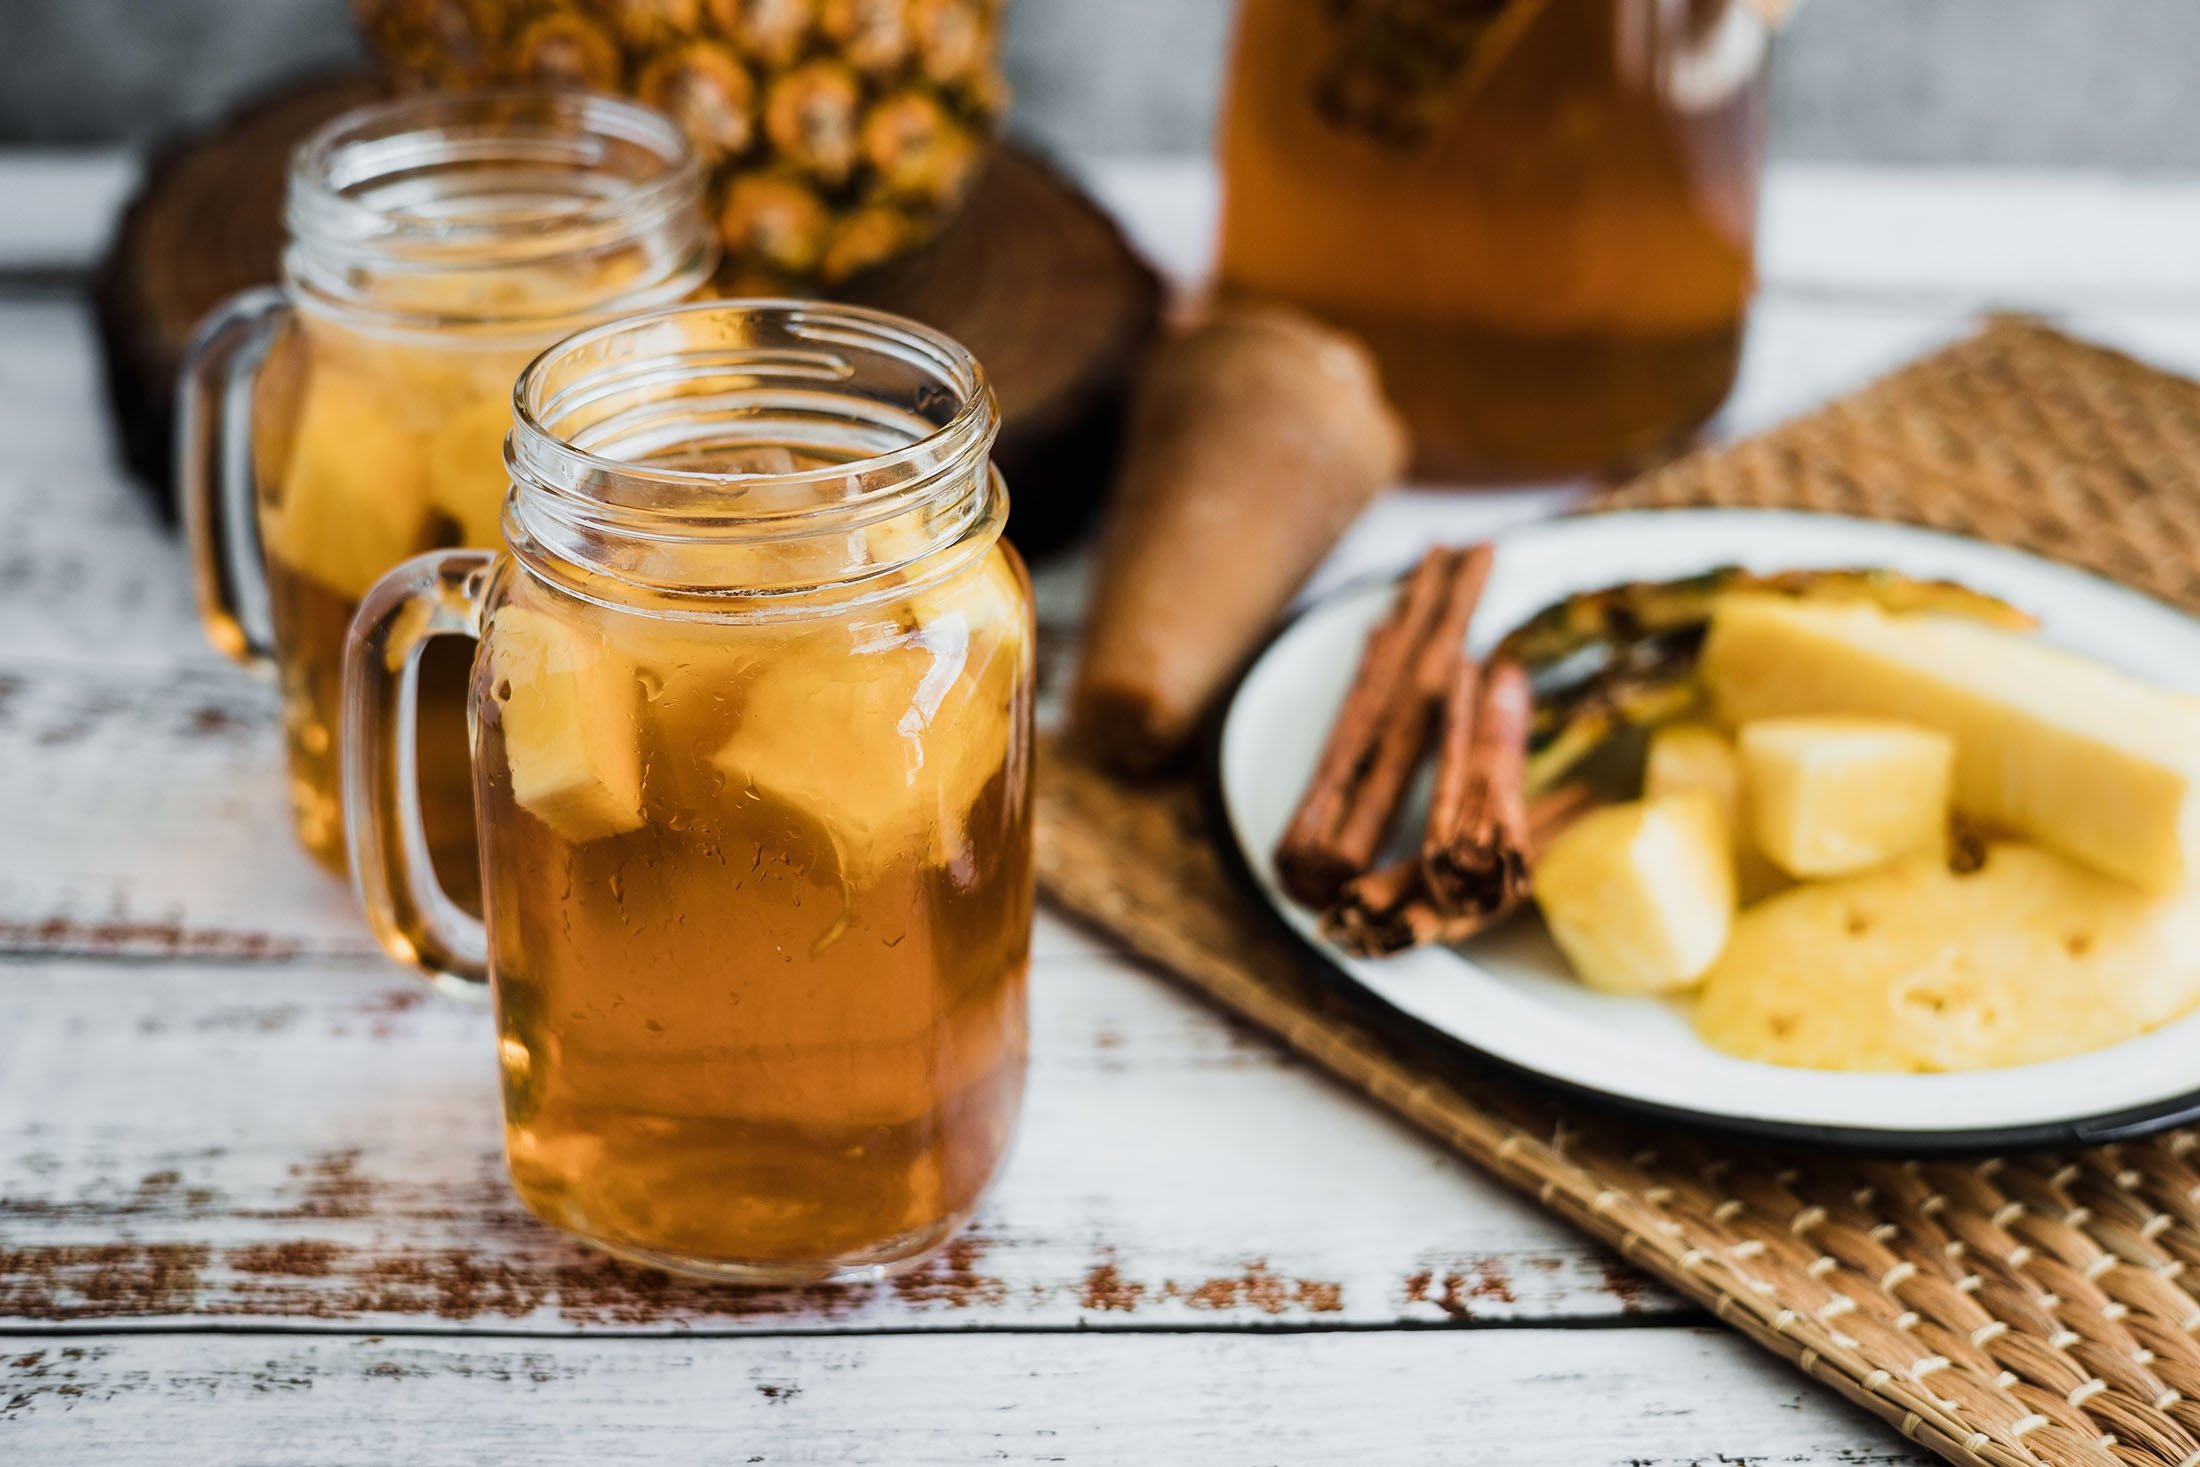 Pineapple ice tea may be just what you need on a summer day. (Shutterstock Photo)